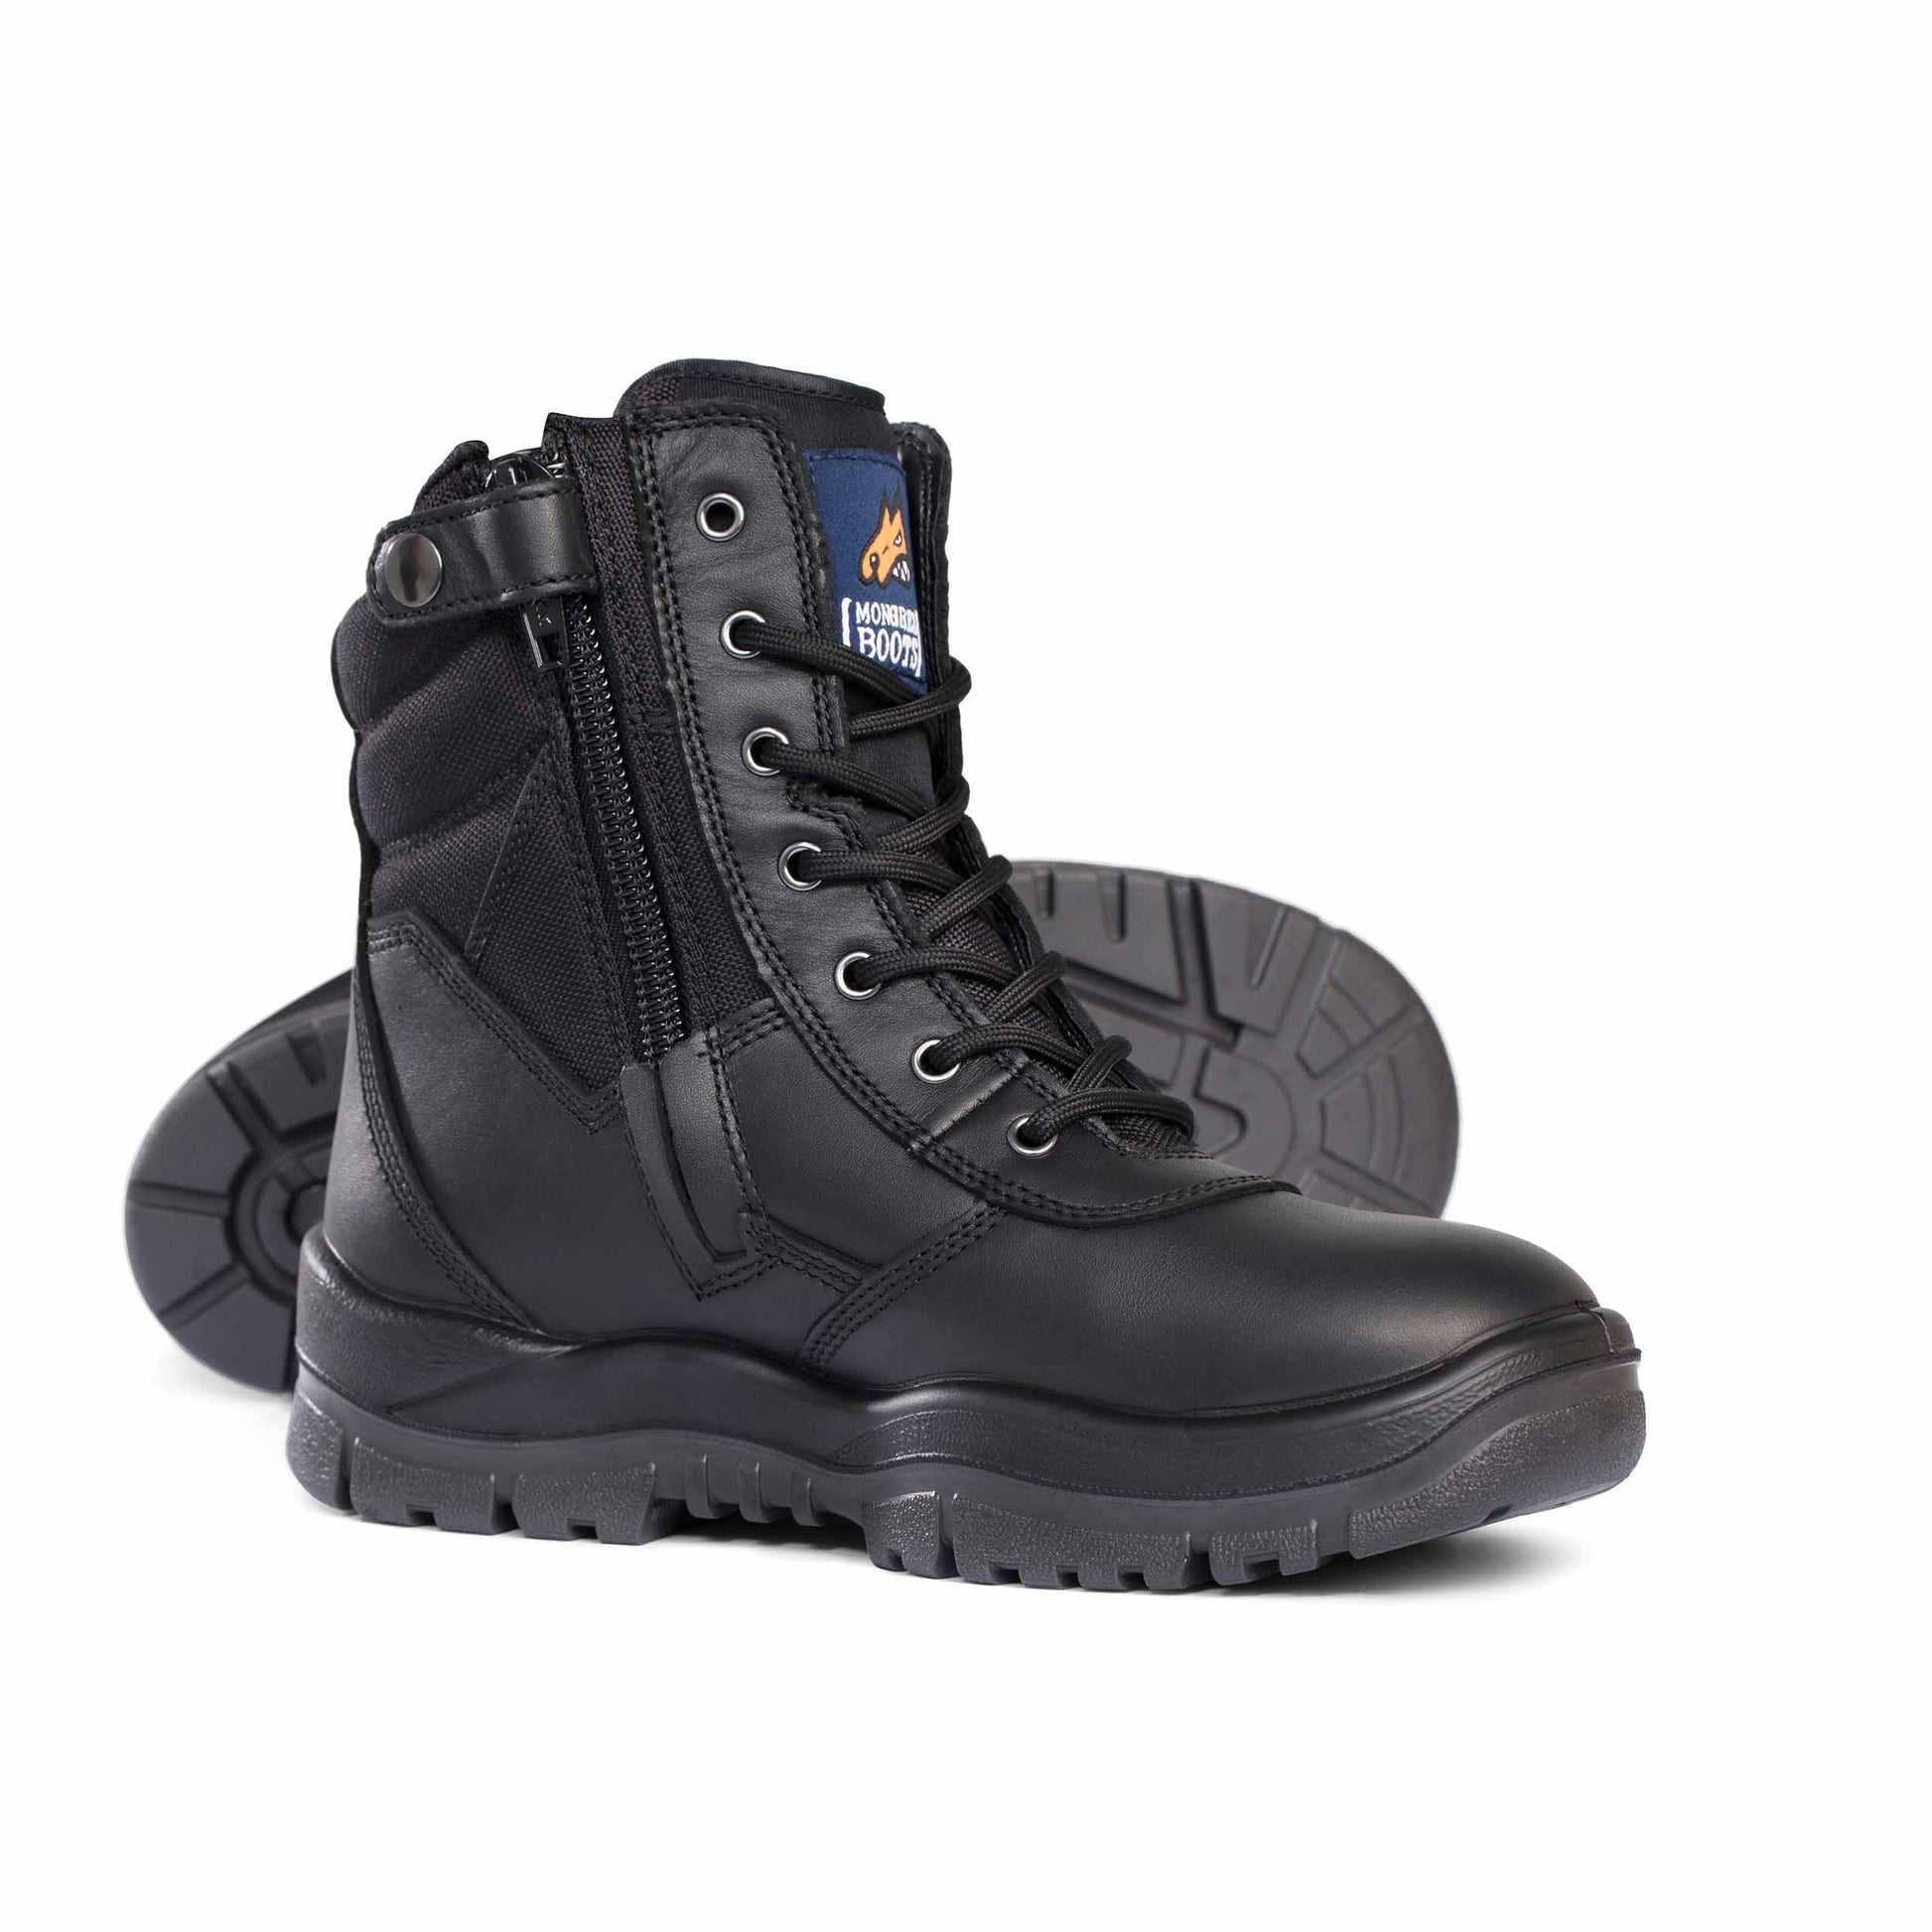 High Zip Safety Boots - made by Mongrel